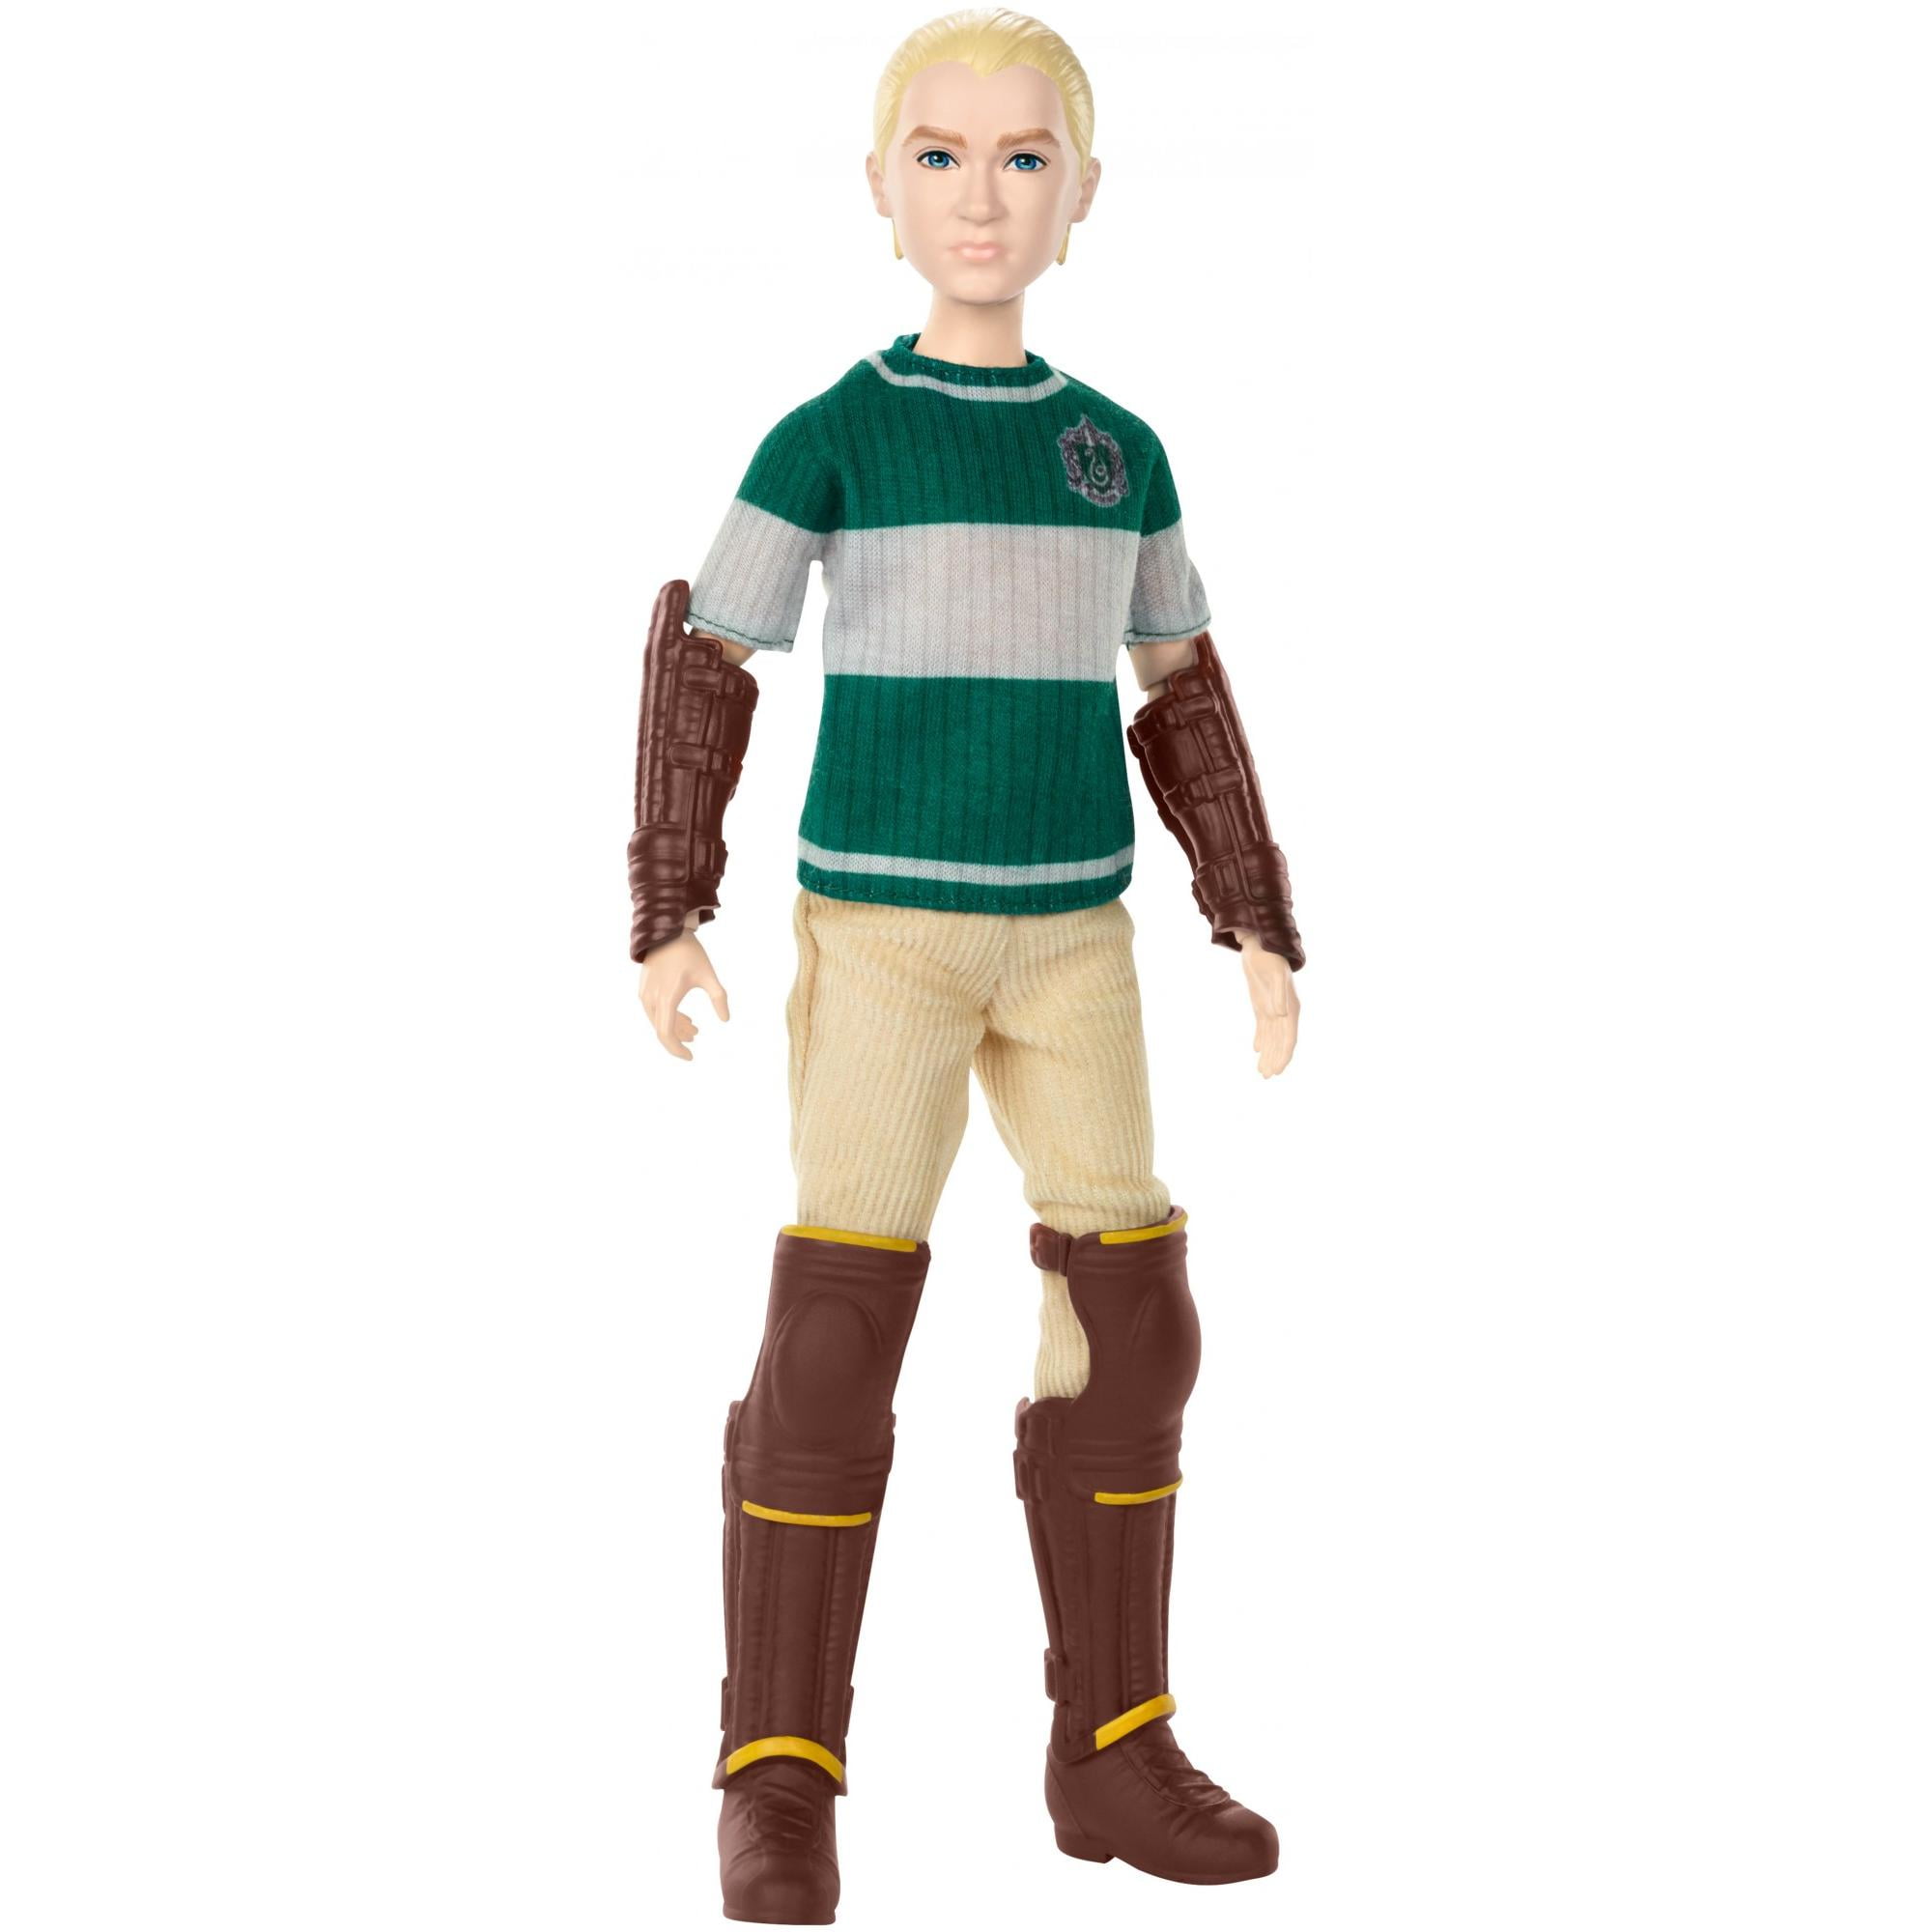 Draco Malfoy Quidditch Harry Potter 10-Inch Doll with Nimbus 